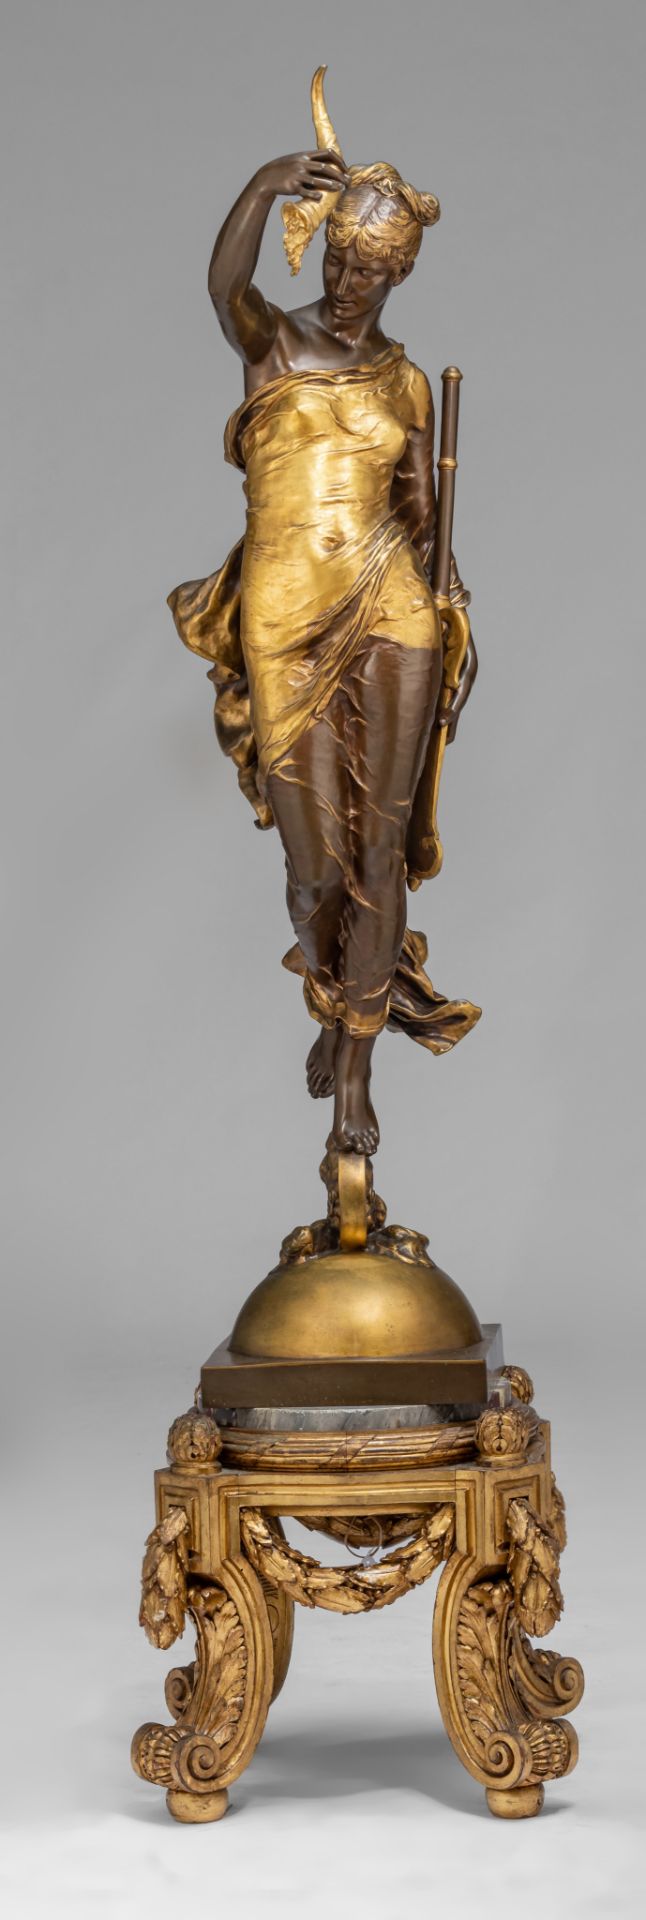 Paul Moreau-Vauthier (1871-1936), 'Fortuna', 1878, gilt and patinated bronze on a matching pedestal, - Image 3 of 14